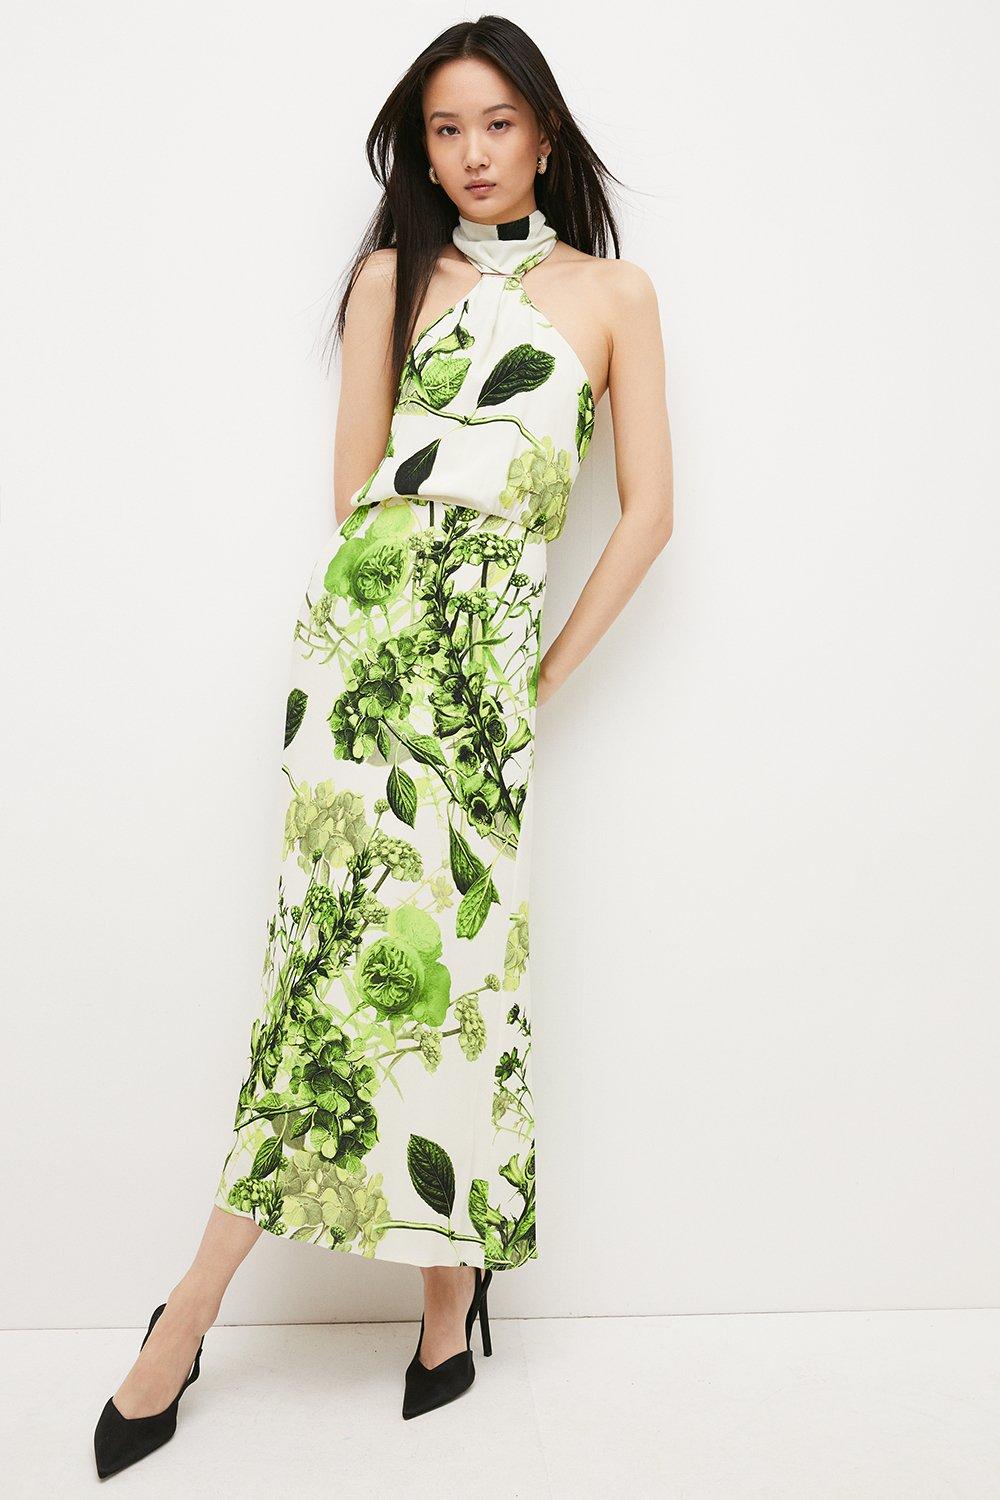 These 5 Karen Millen Dresses Are Just Perfect for Weddings | Who 